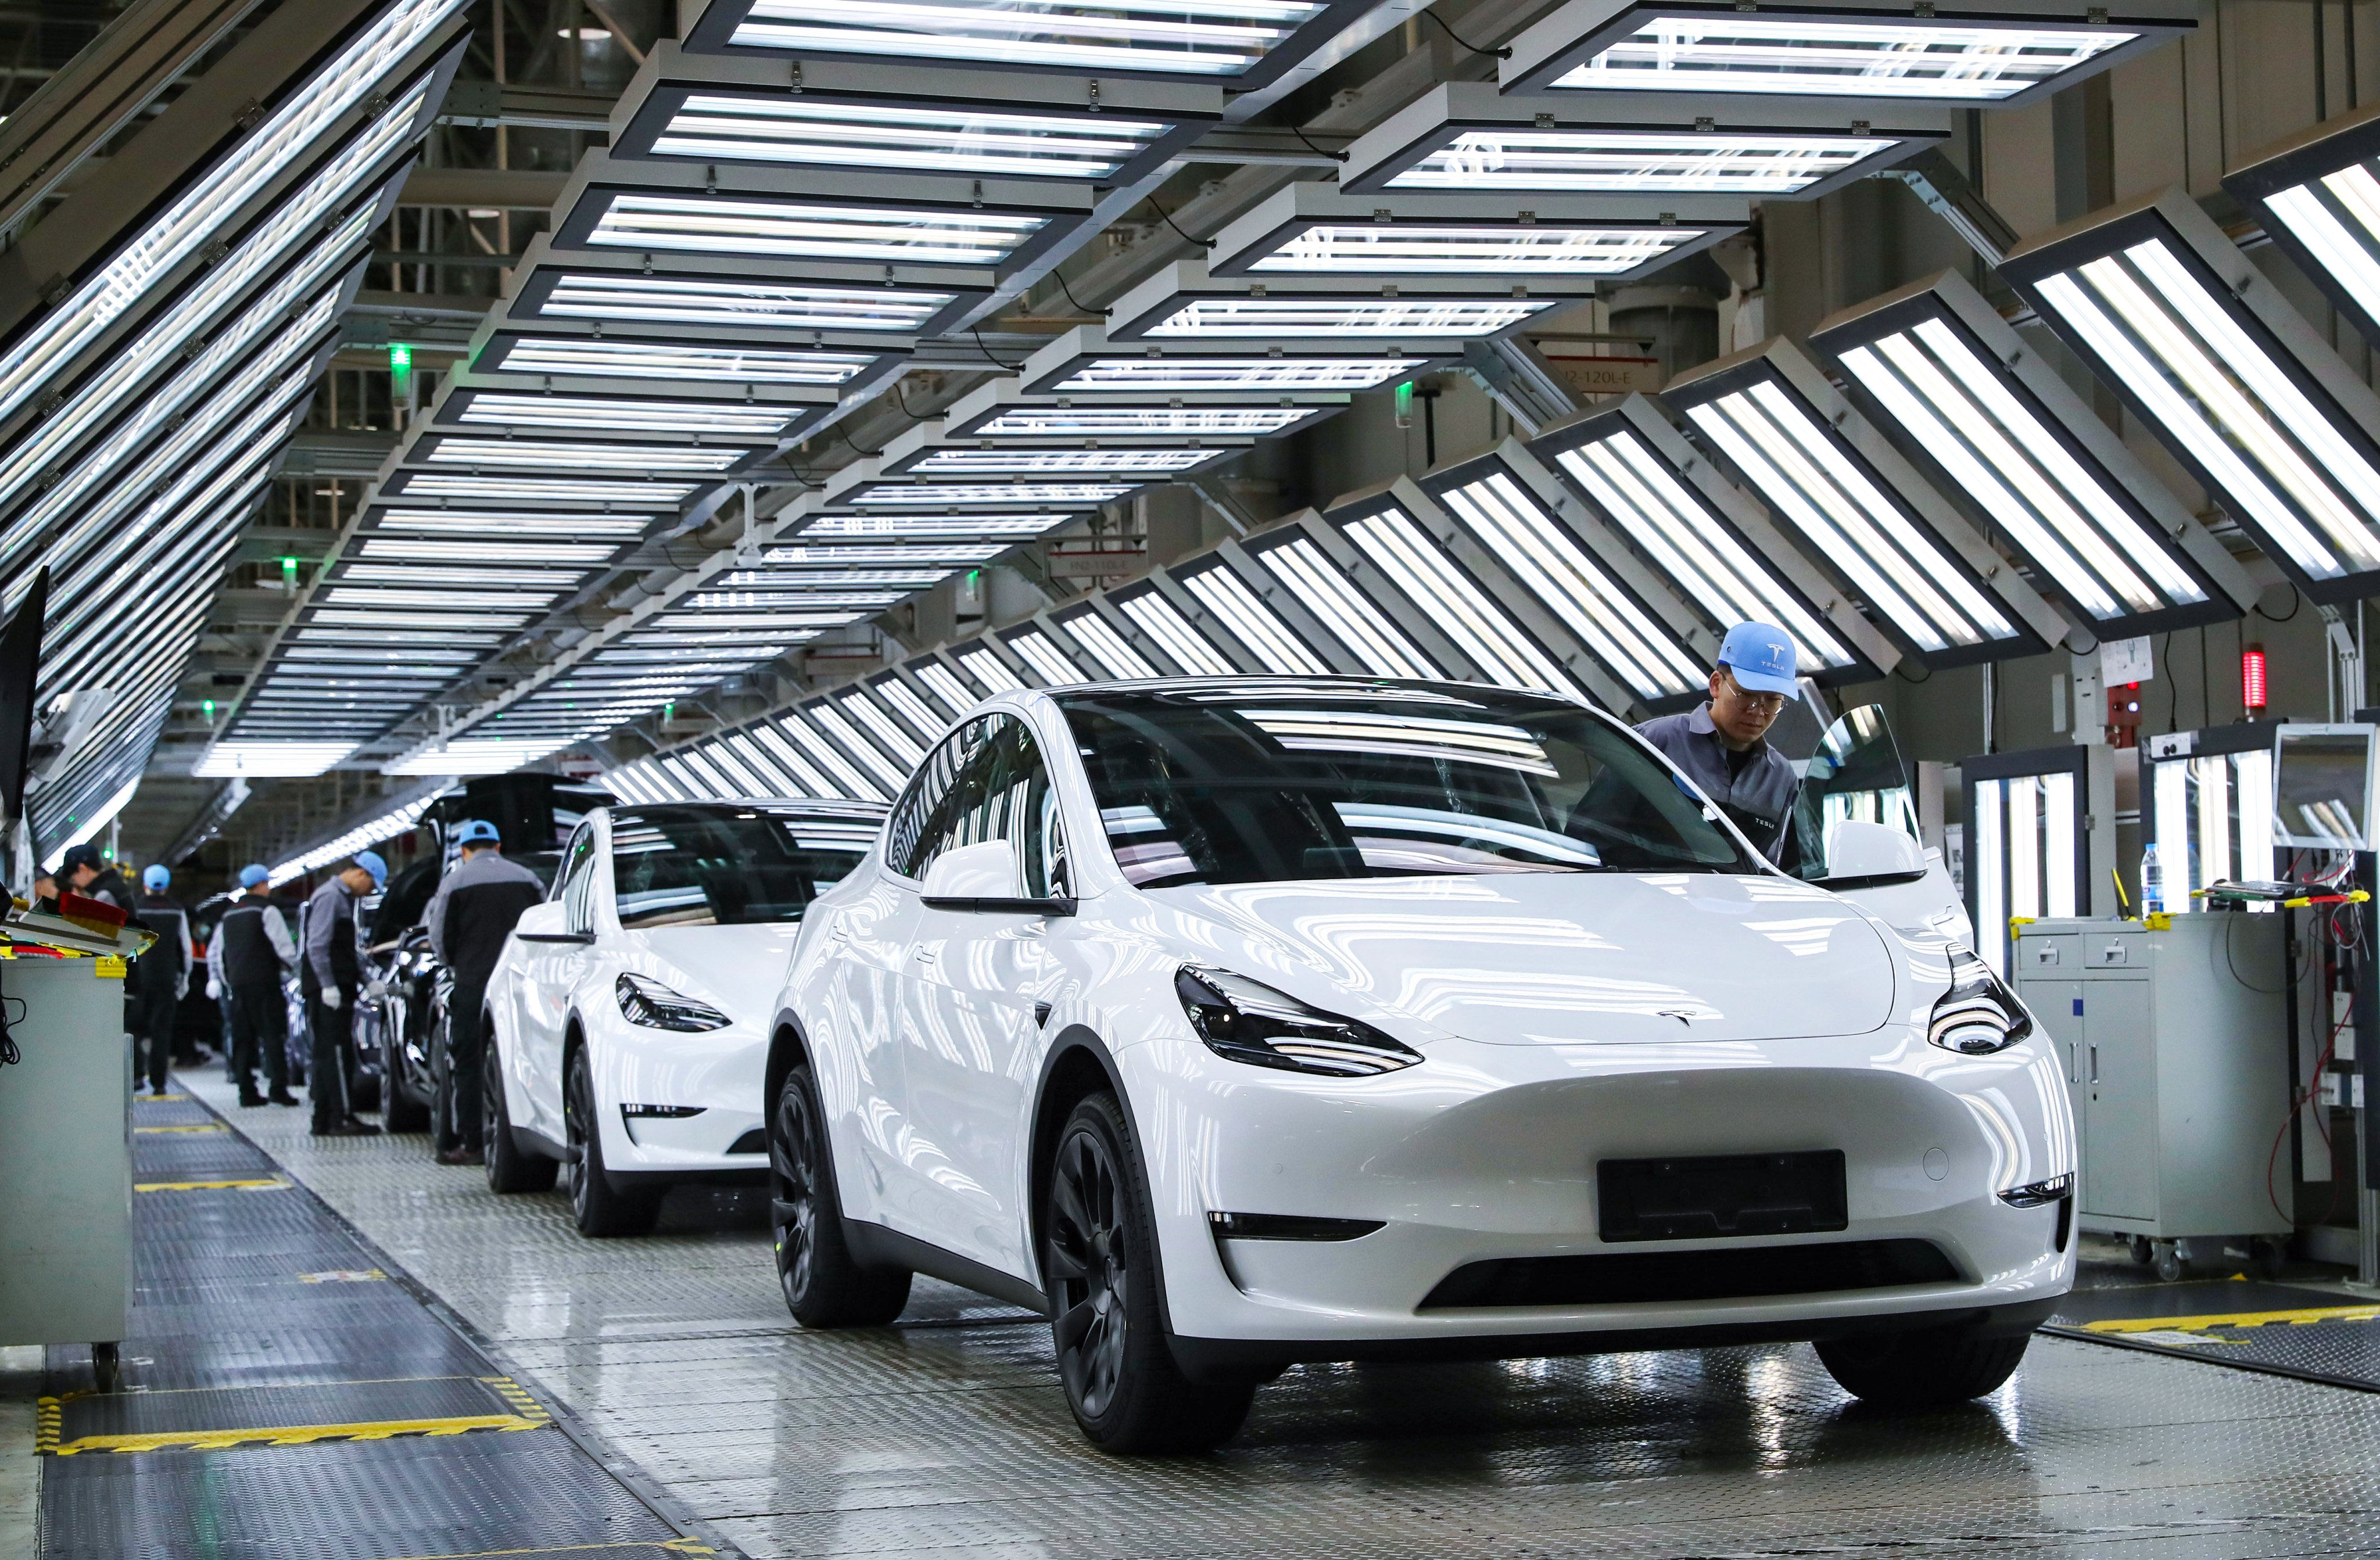 ‘The review will give Tesla car owners and other fans of its cars a lot of confidence in driving them on the streets of China,’ said Chen Jinzhu at Shanghai Mingliang Auto Service. Photo: Xinhua